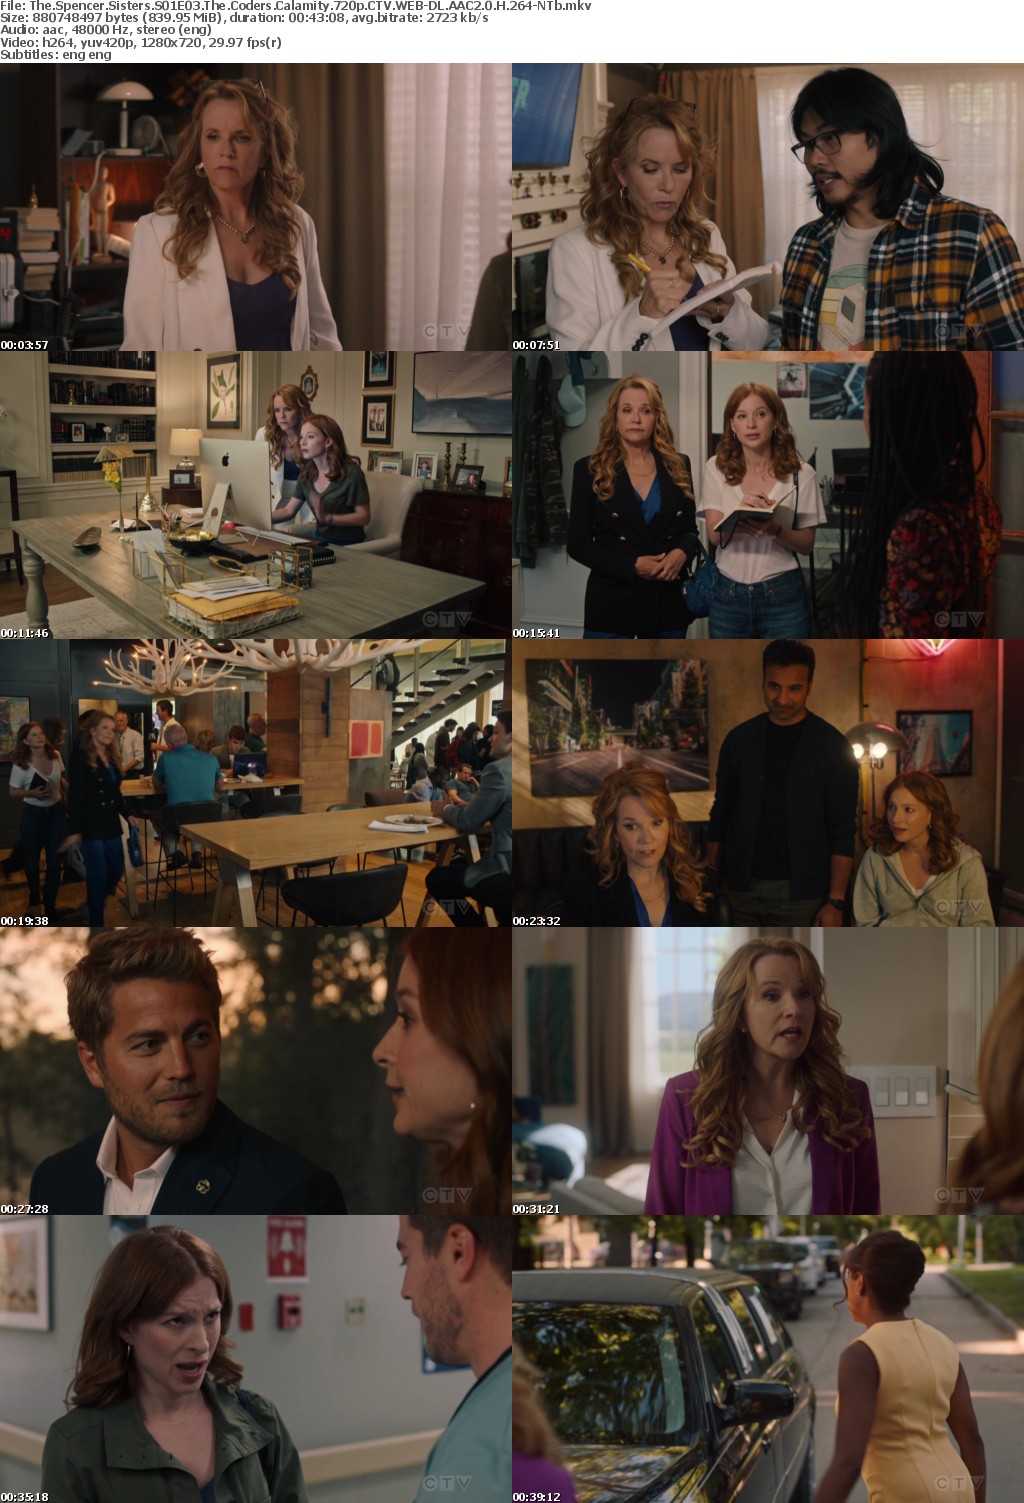 The Spencer Sisters S01E03 The Coders Calamity 720p CTV WEBRip AAC2 0 H264-NTb